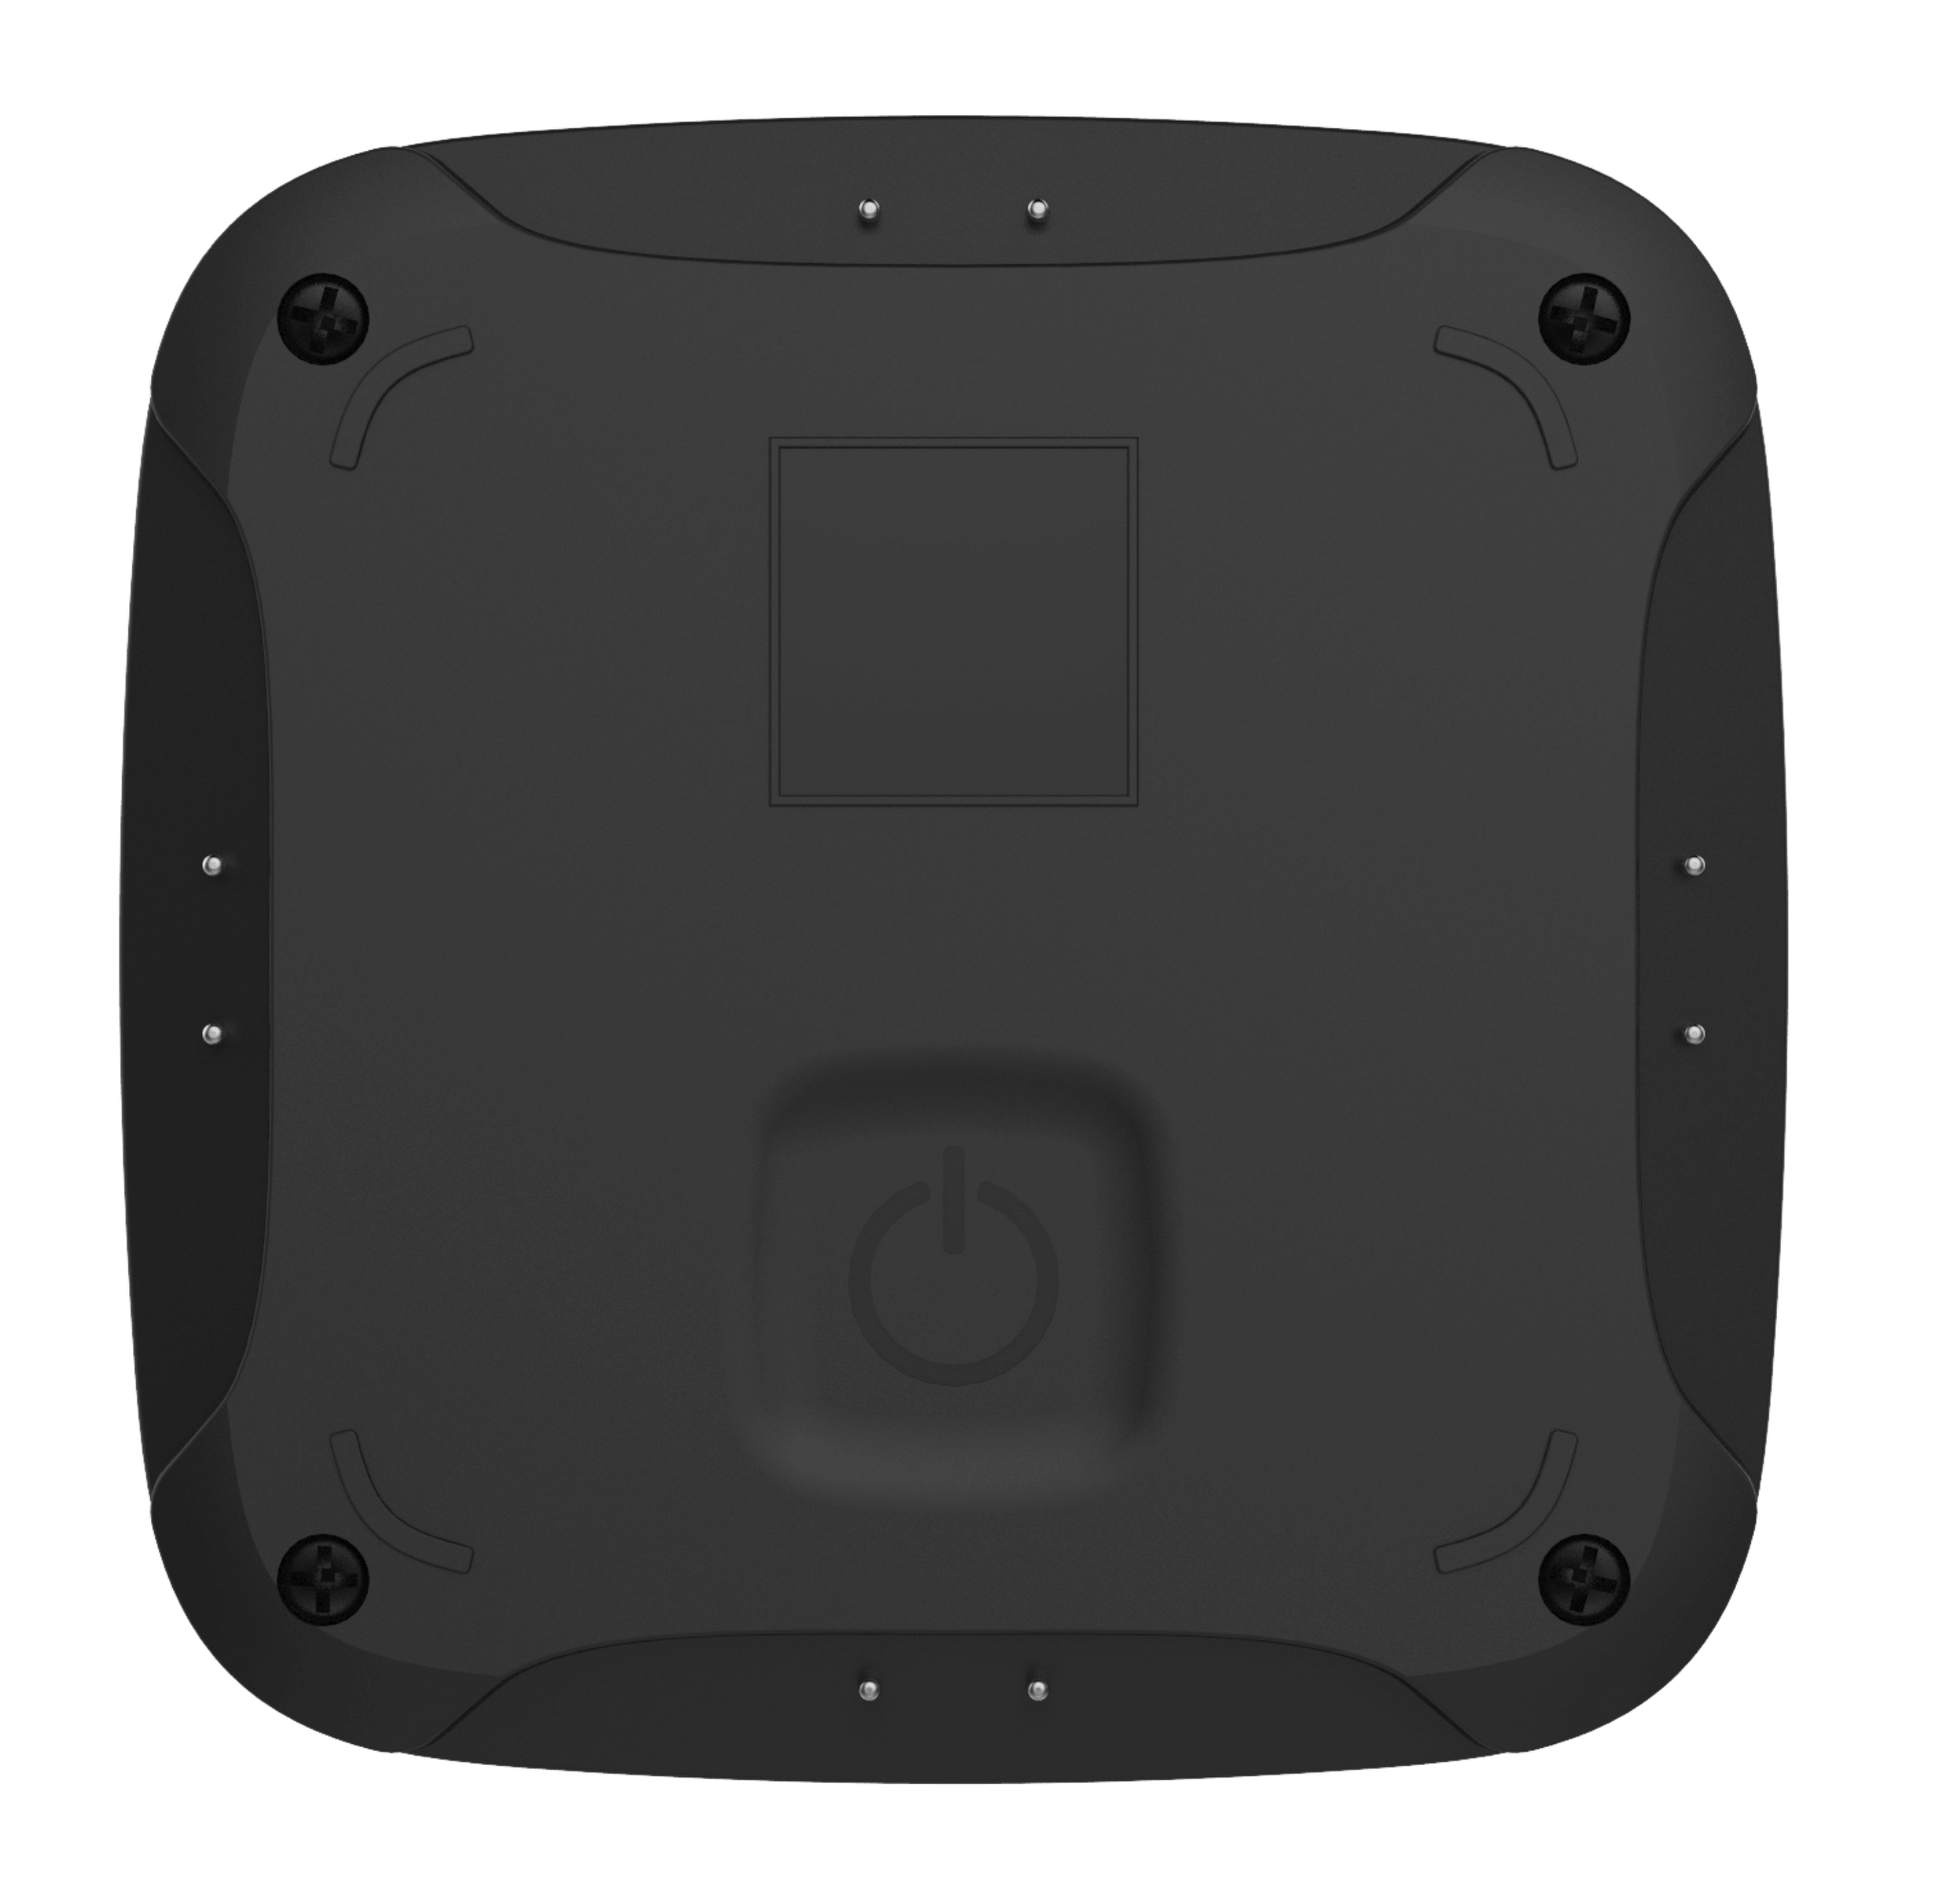 Black Ajax LeaksProtect a leak detection device for home and business security and flooding detection.  56 × 56 × 14 mm in size, 61 grams in weight, back view of device, IP65 rated